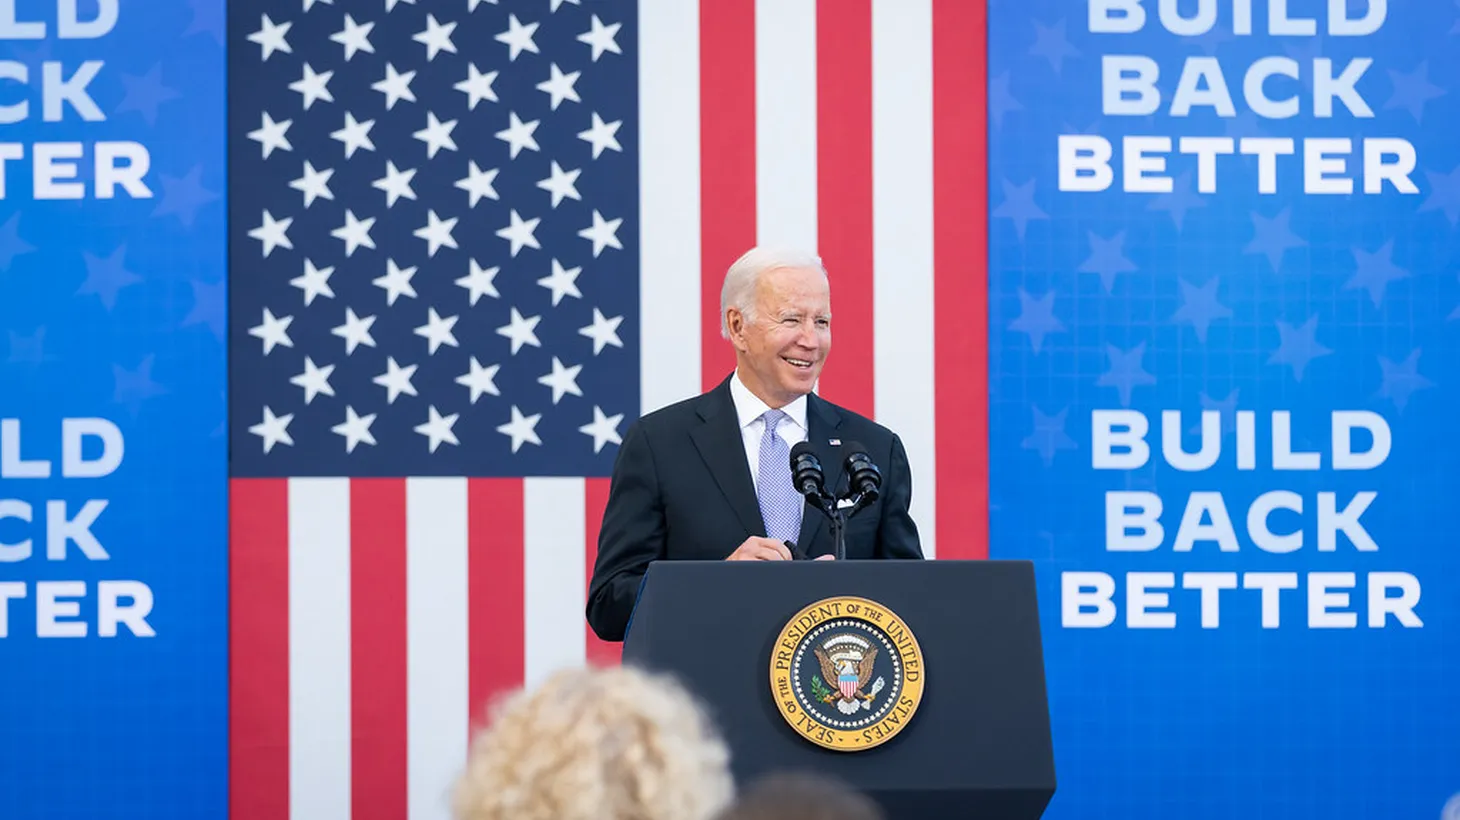 President Joe Biden delivers remarks on his Build Back Better agenda, Wednesday, October 20, 2021, at the Electric City Trolley Museum in Scranton, Pennsylvania.